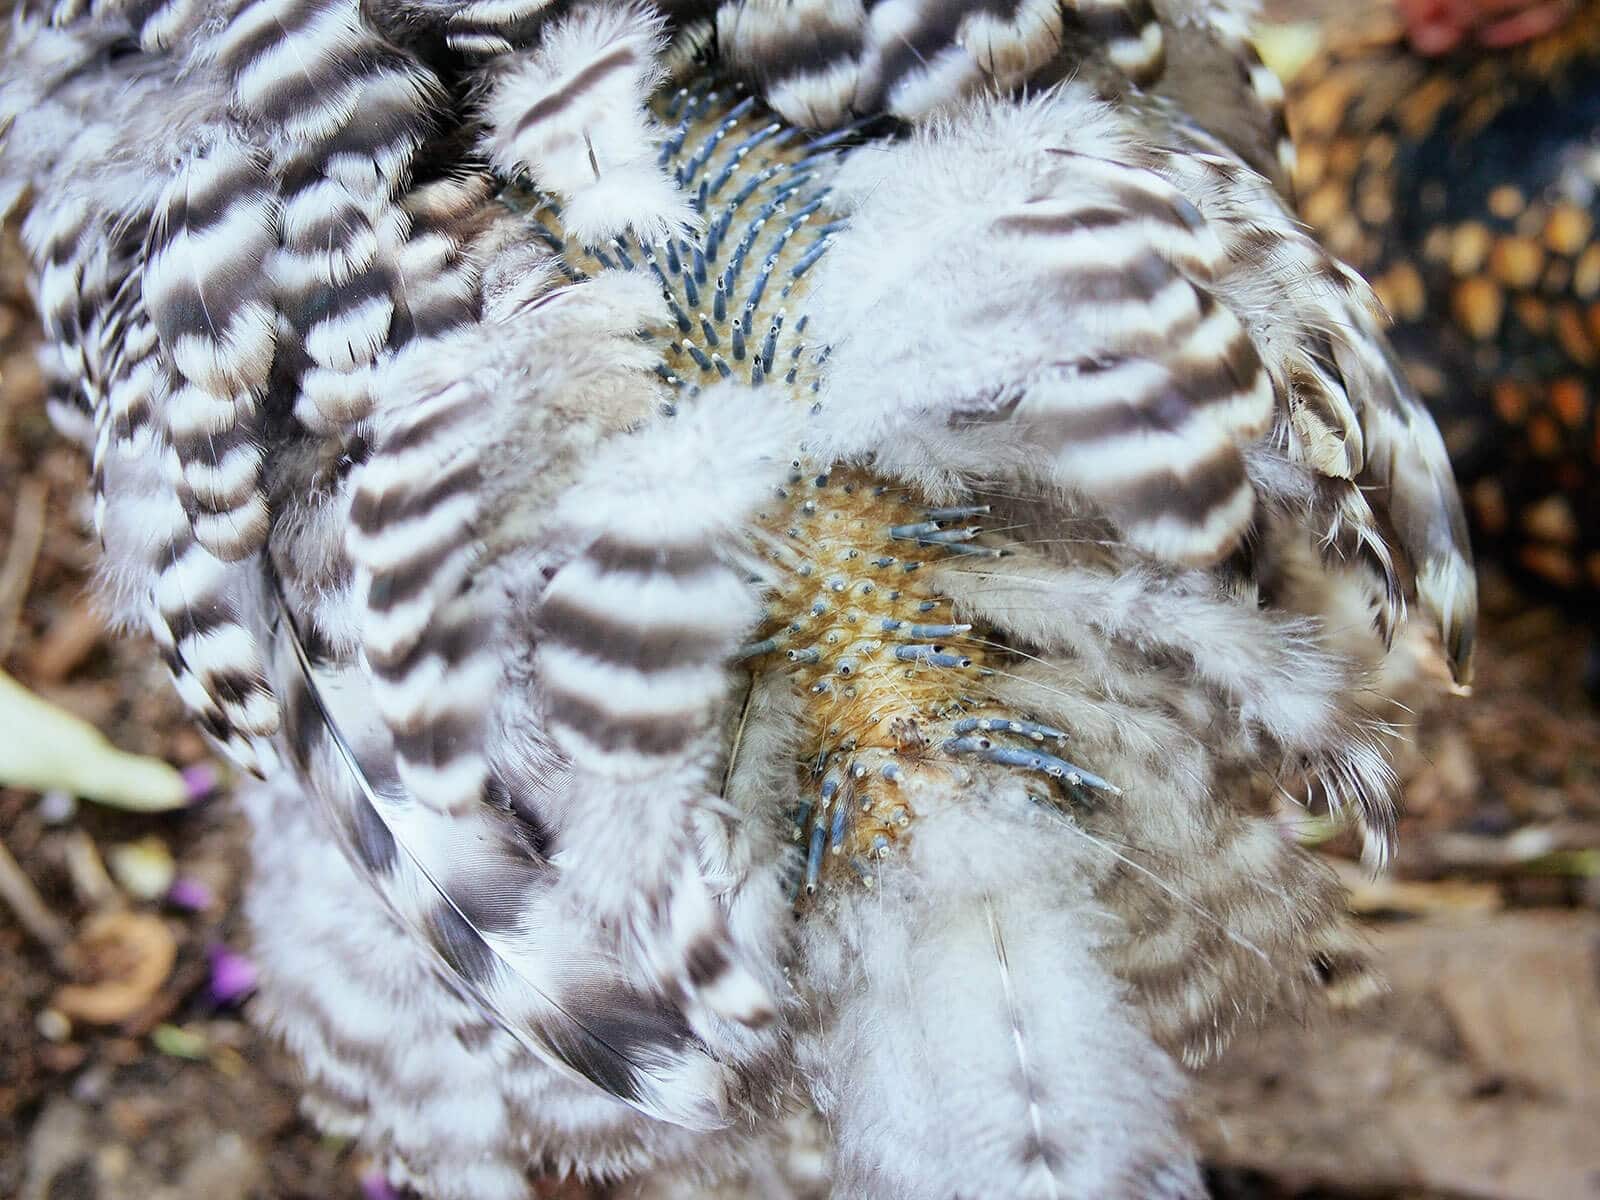 Pin feathers growing out along a hen's back